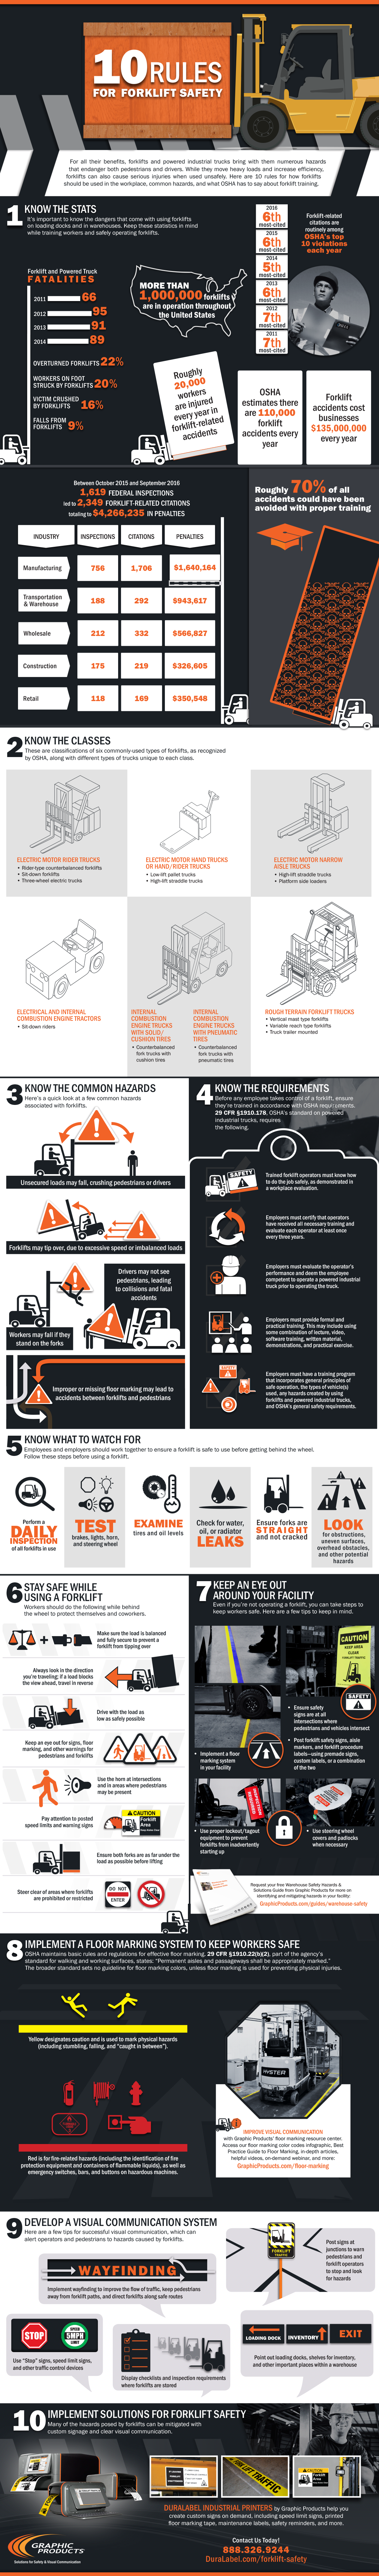 10 Forklift Safety Rules #infographic